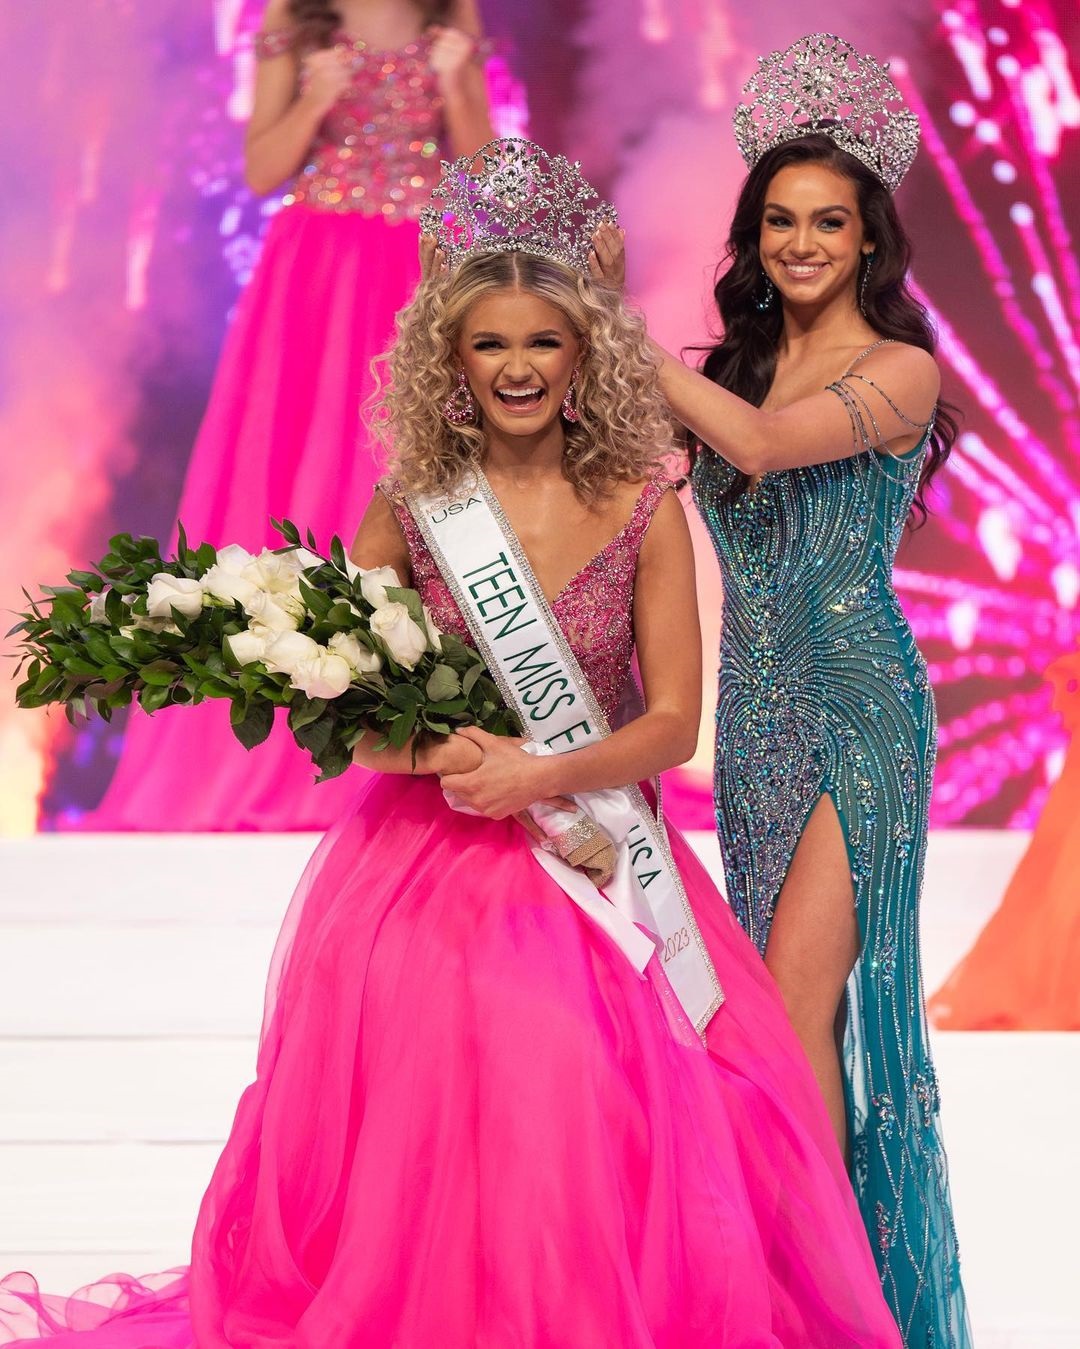 Teen Miss Earth USA 2023 is Tayan Stansfield of Kentucky